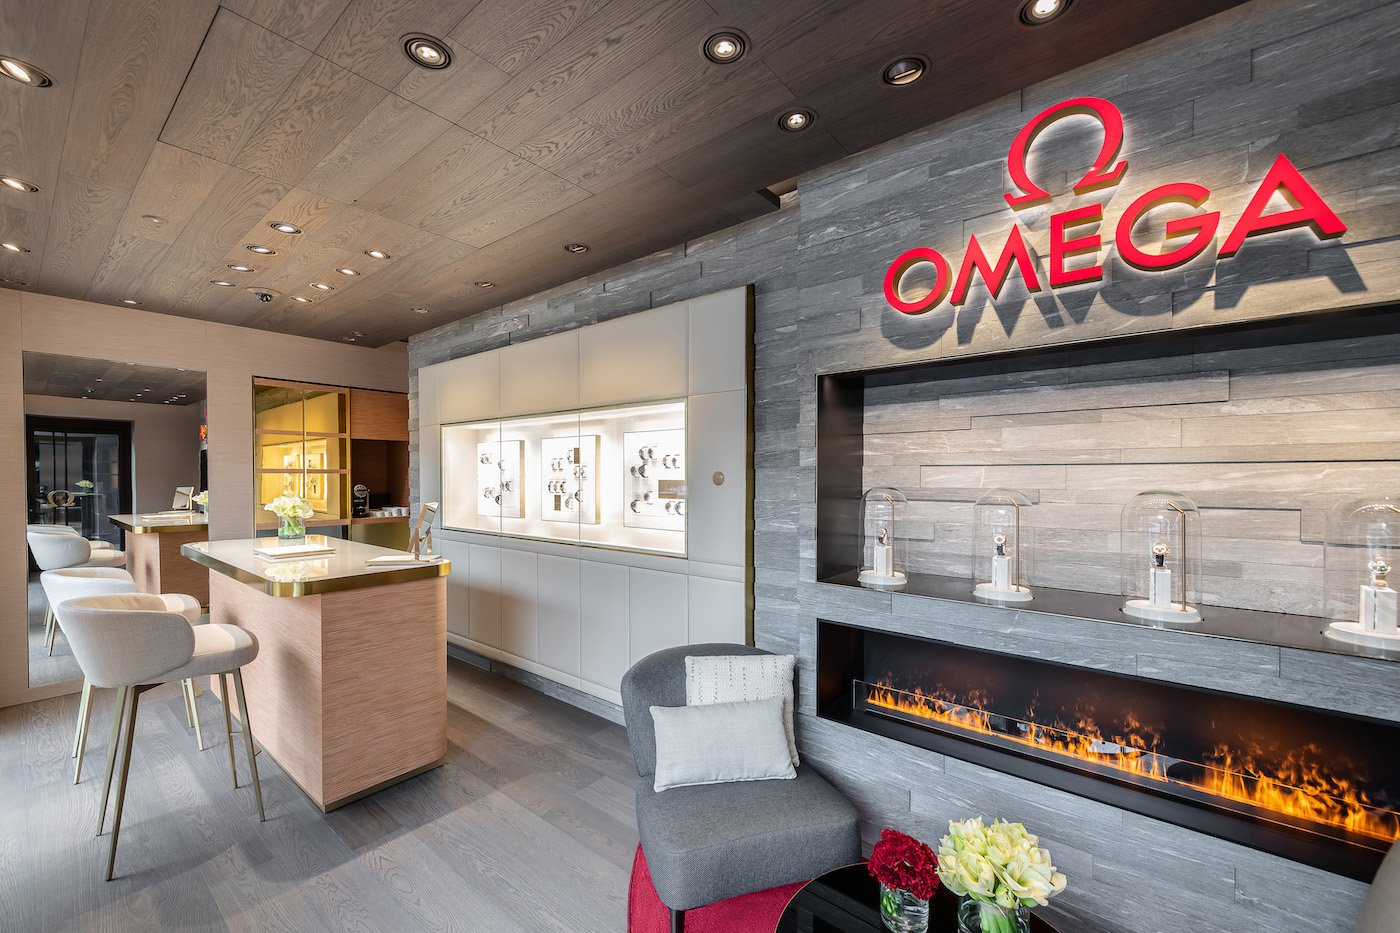 Omega opens a new boutique in St. Moritz